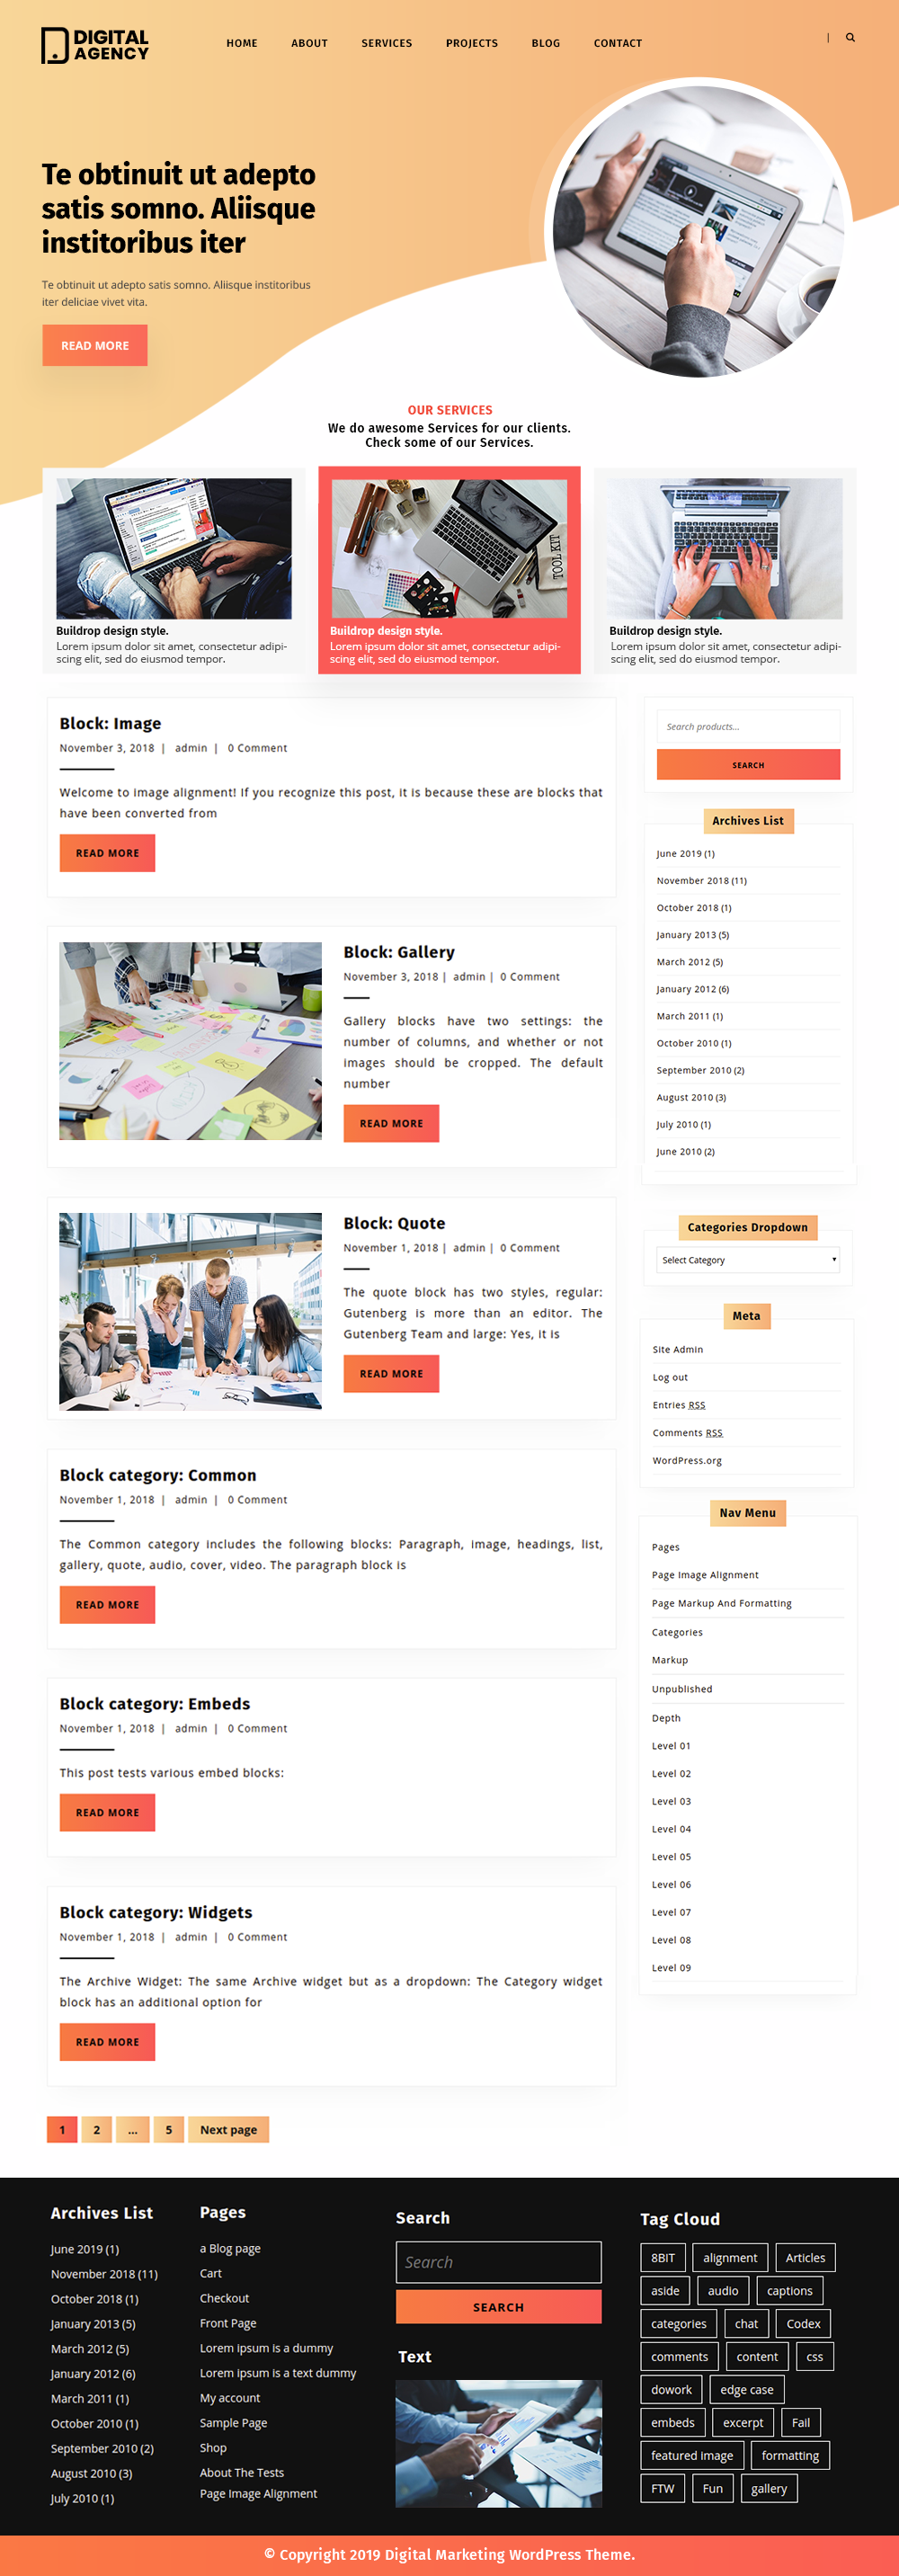 Wp themes download